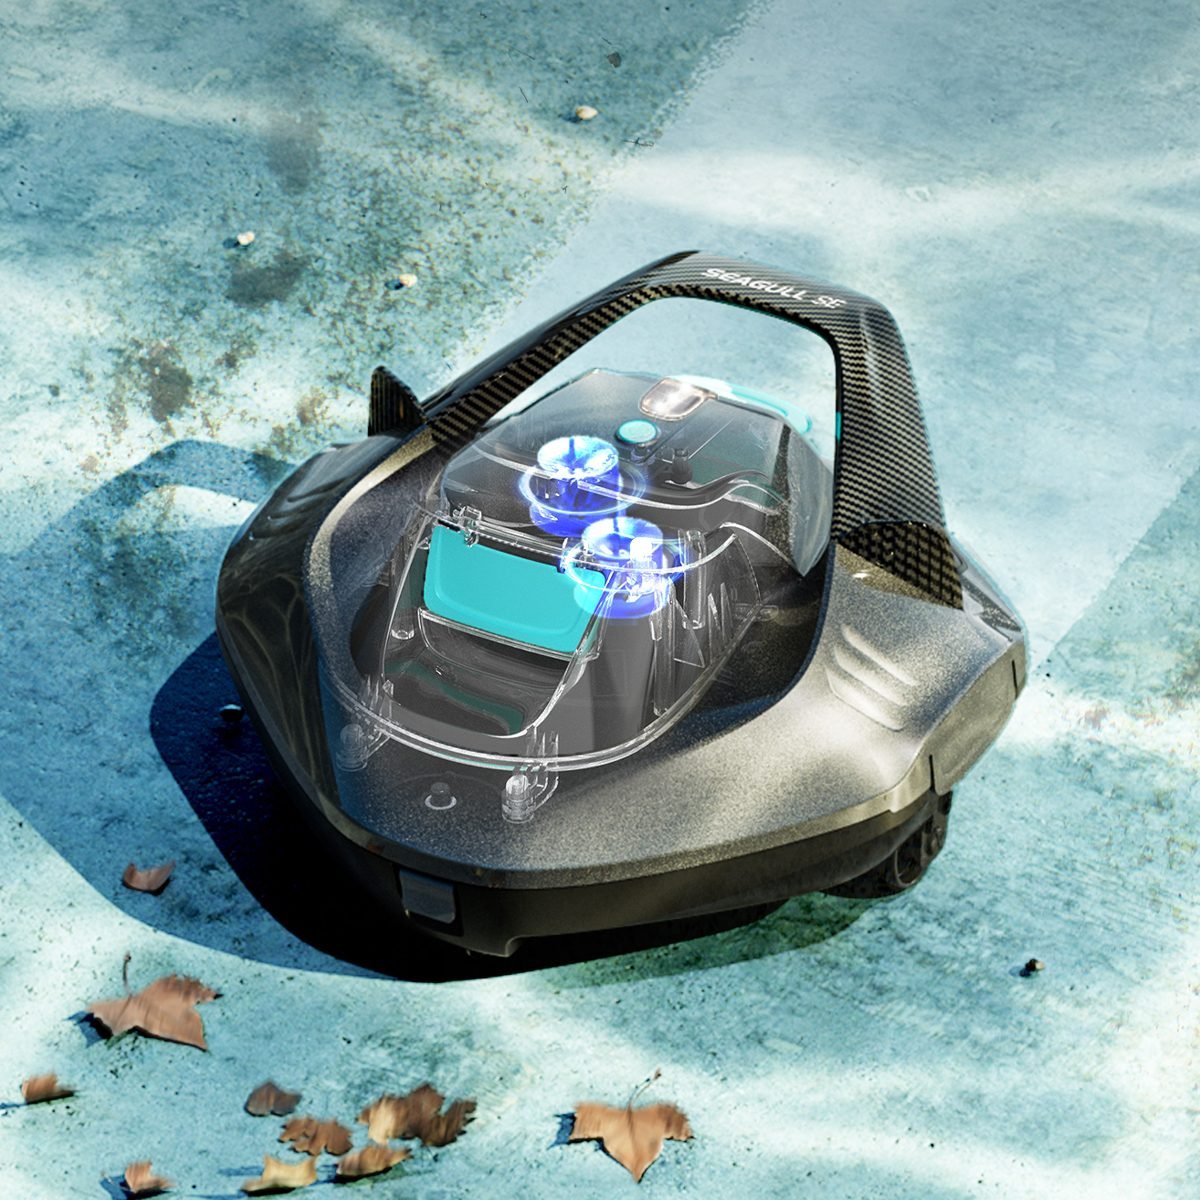 This Robotic Pool Cleaner Keeps Pool Water "Sparkling" and Scrubs Tile—Get It for $110 Off